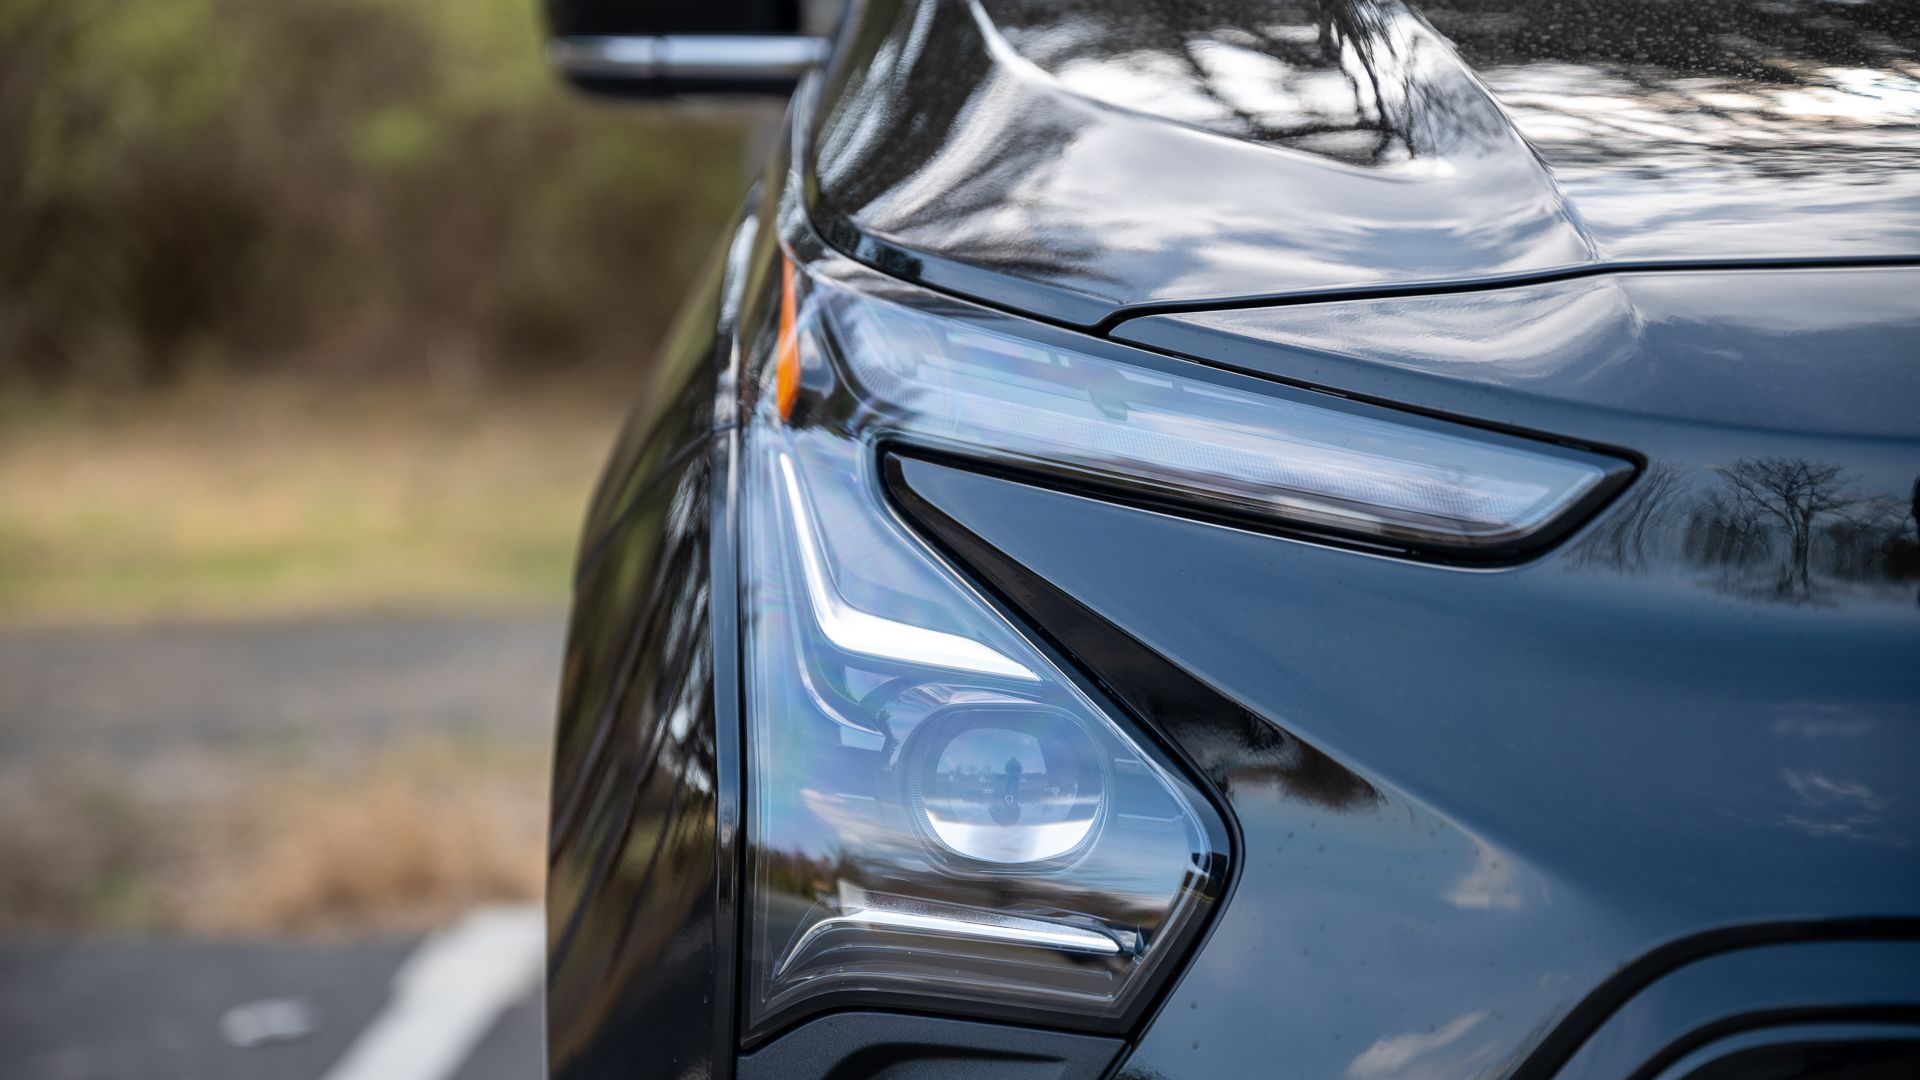 Front right headlight on the 2023 Chevy Bolt EV.